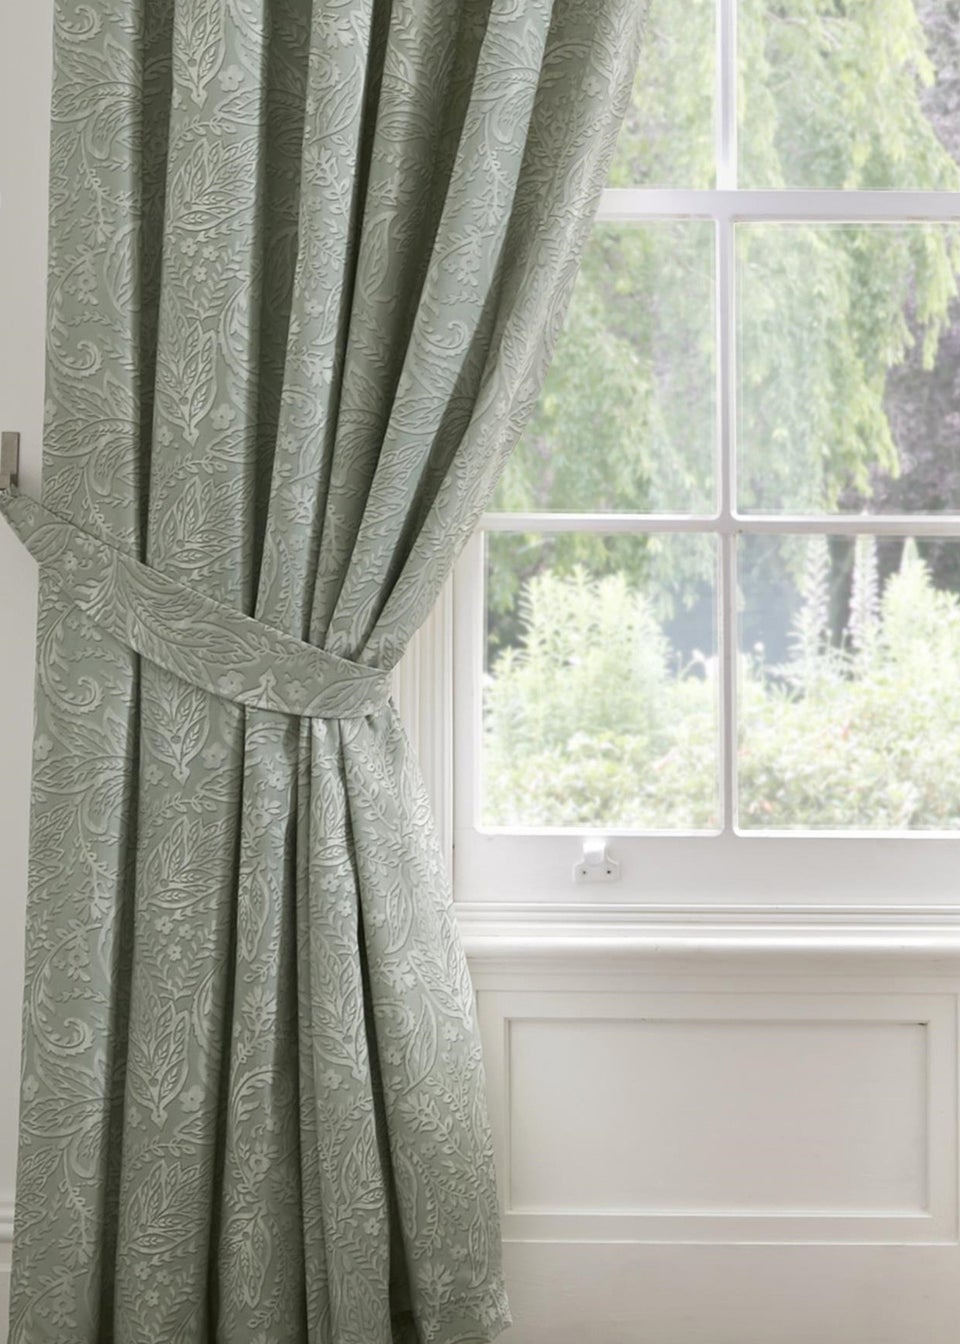 Dreams & Drapes Aveline Pencil Pleat Curtains With Tie-Backs